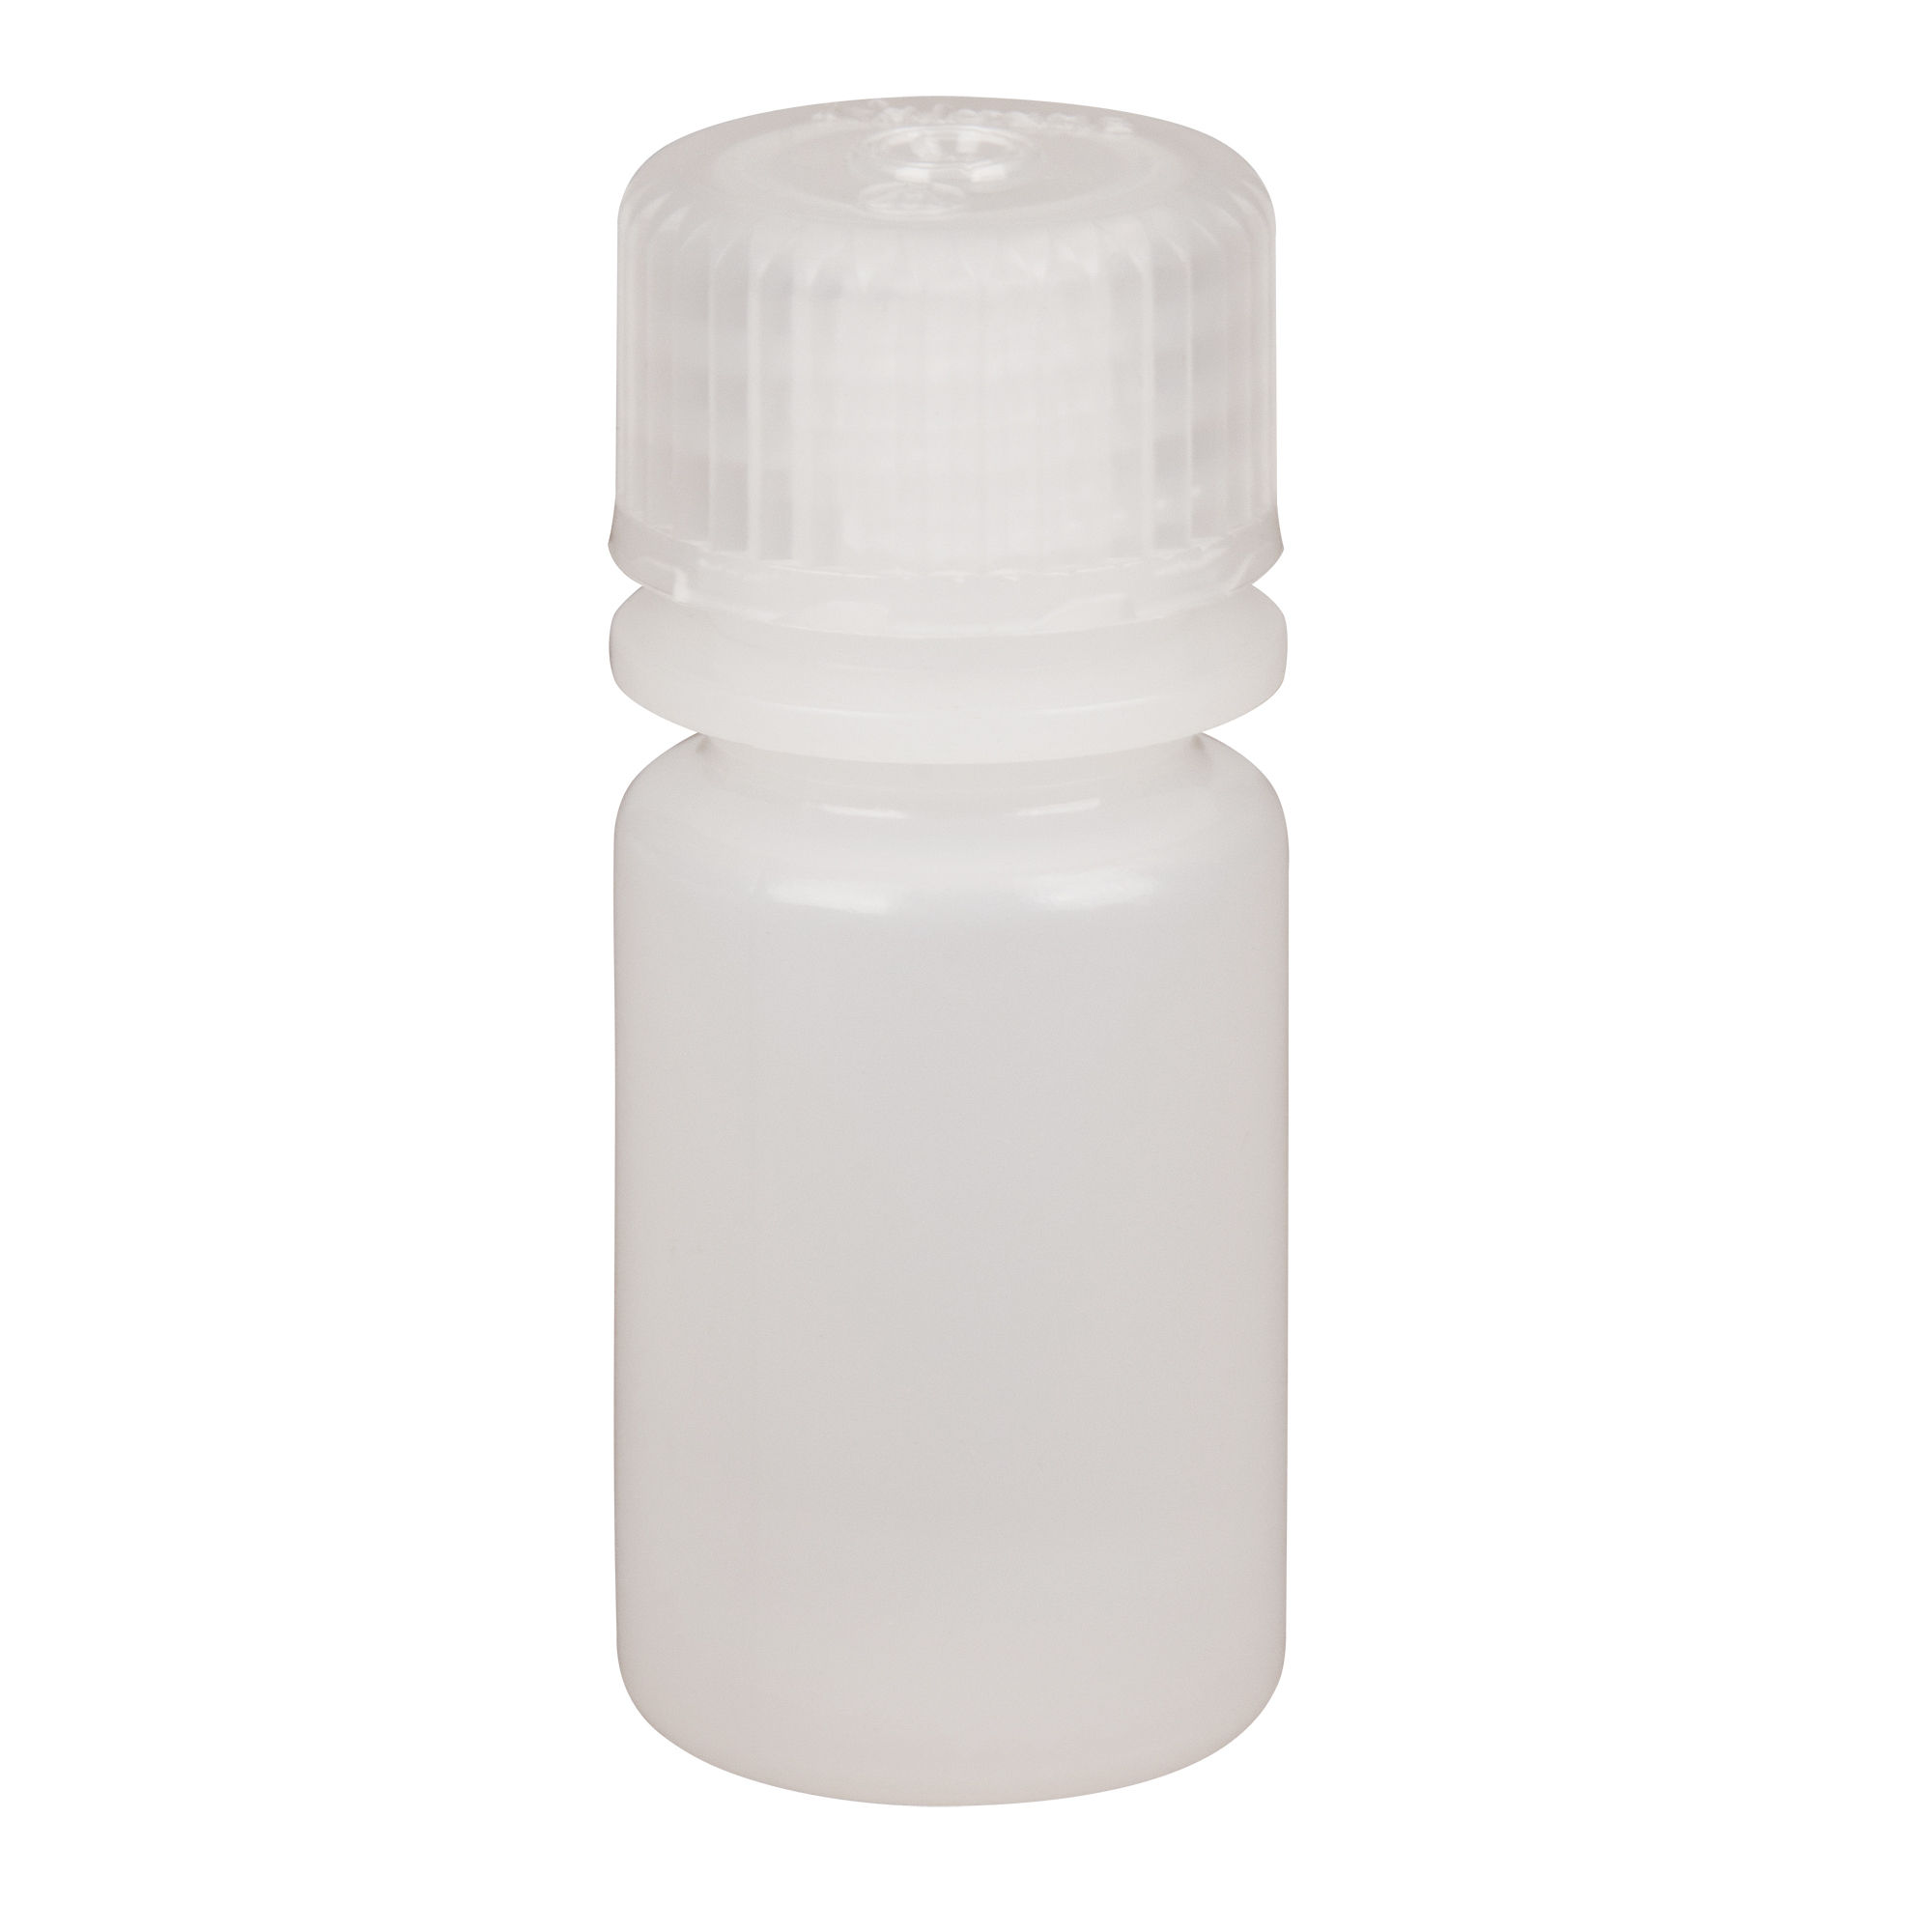 Reagent Bottle Clear/Brown 15ml